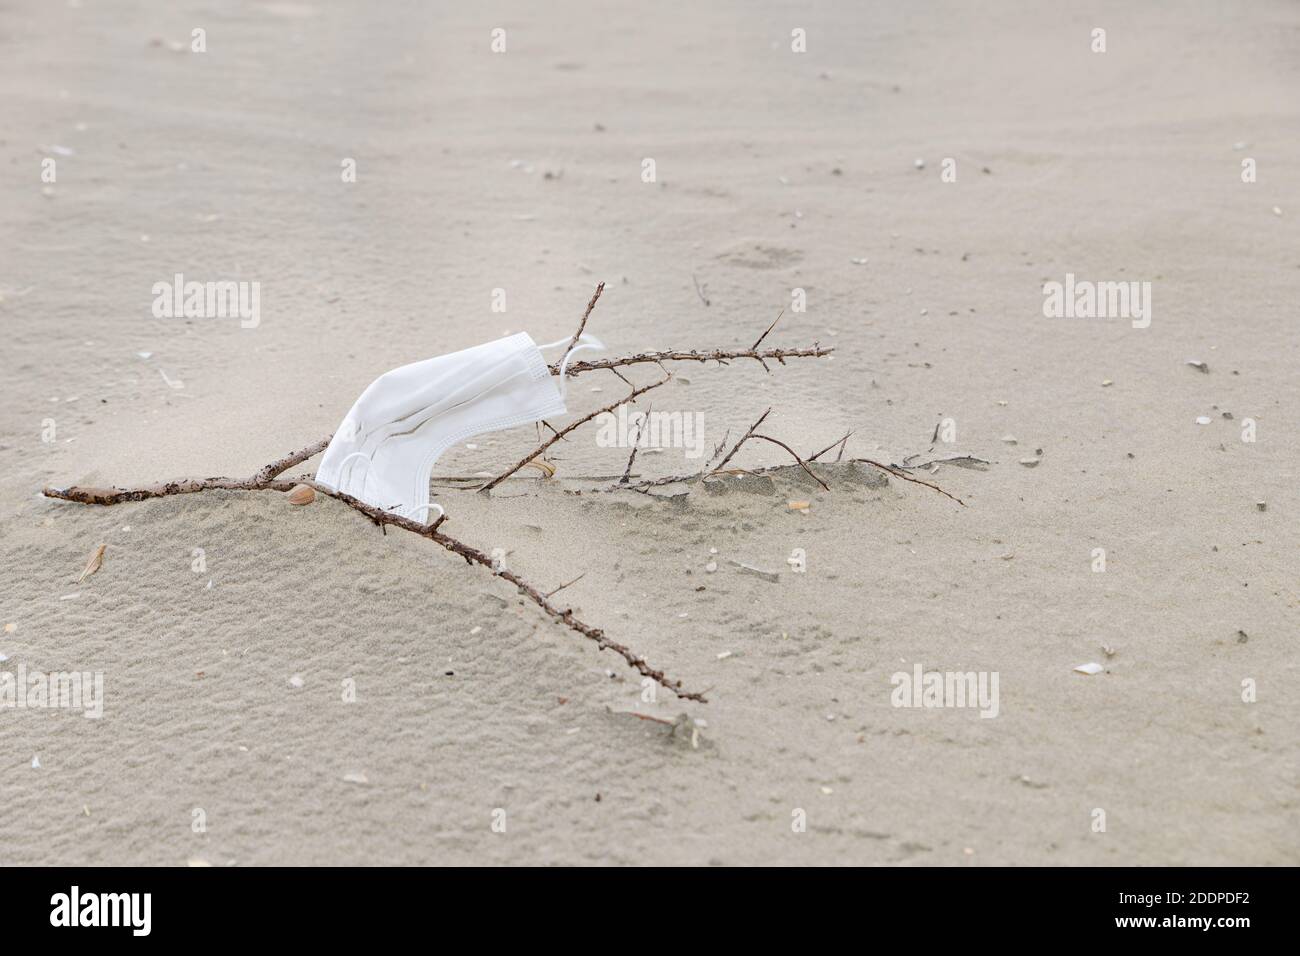 A face mask for protection during the Covid-19 pandemic is left behind on the beach causing pollution. Stock Photo